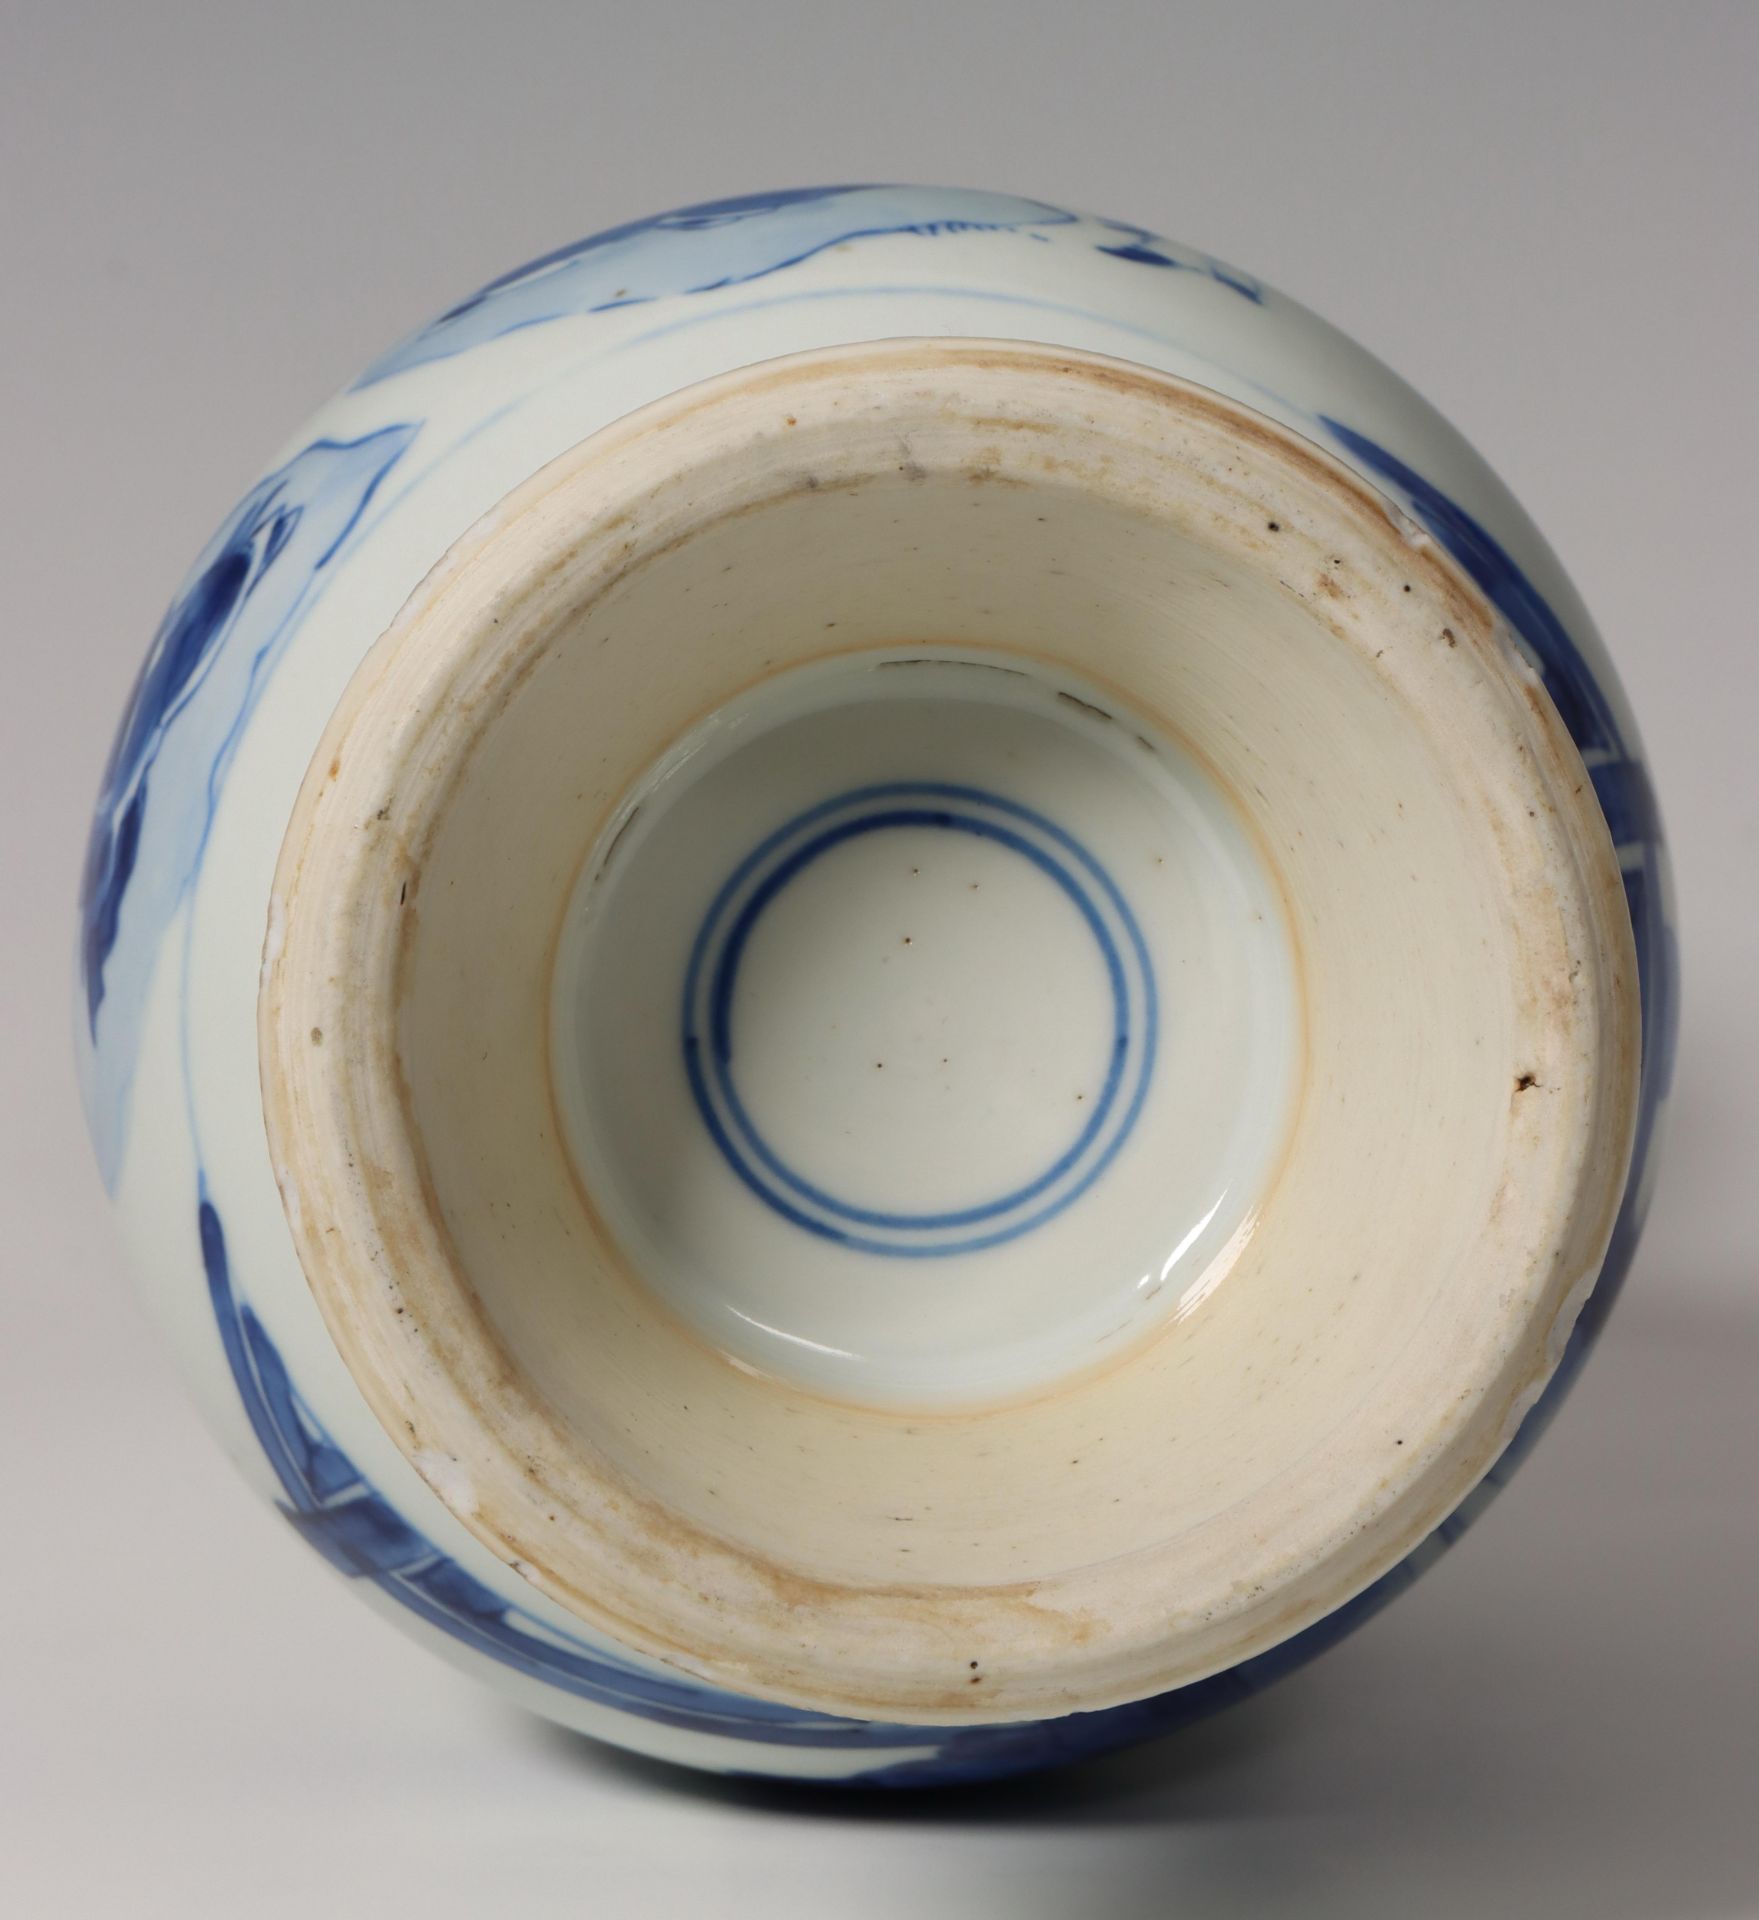 China, blue and white Transitional porcelain 'scholars' vase, mid-17th century, - Image 12 of 16